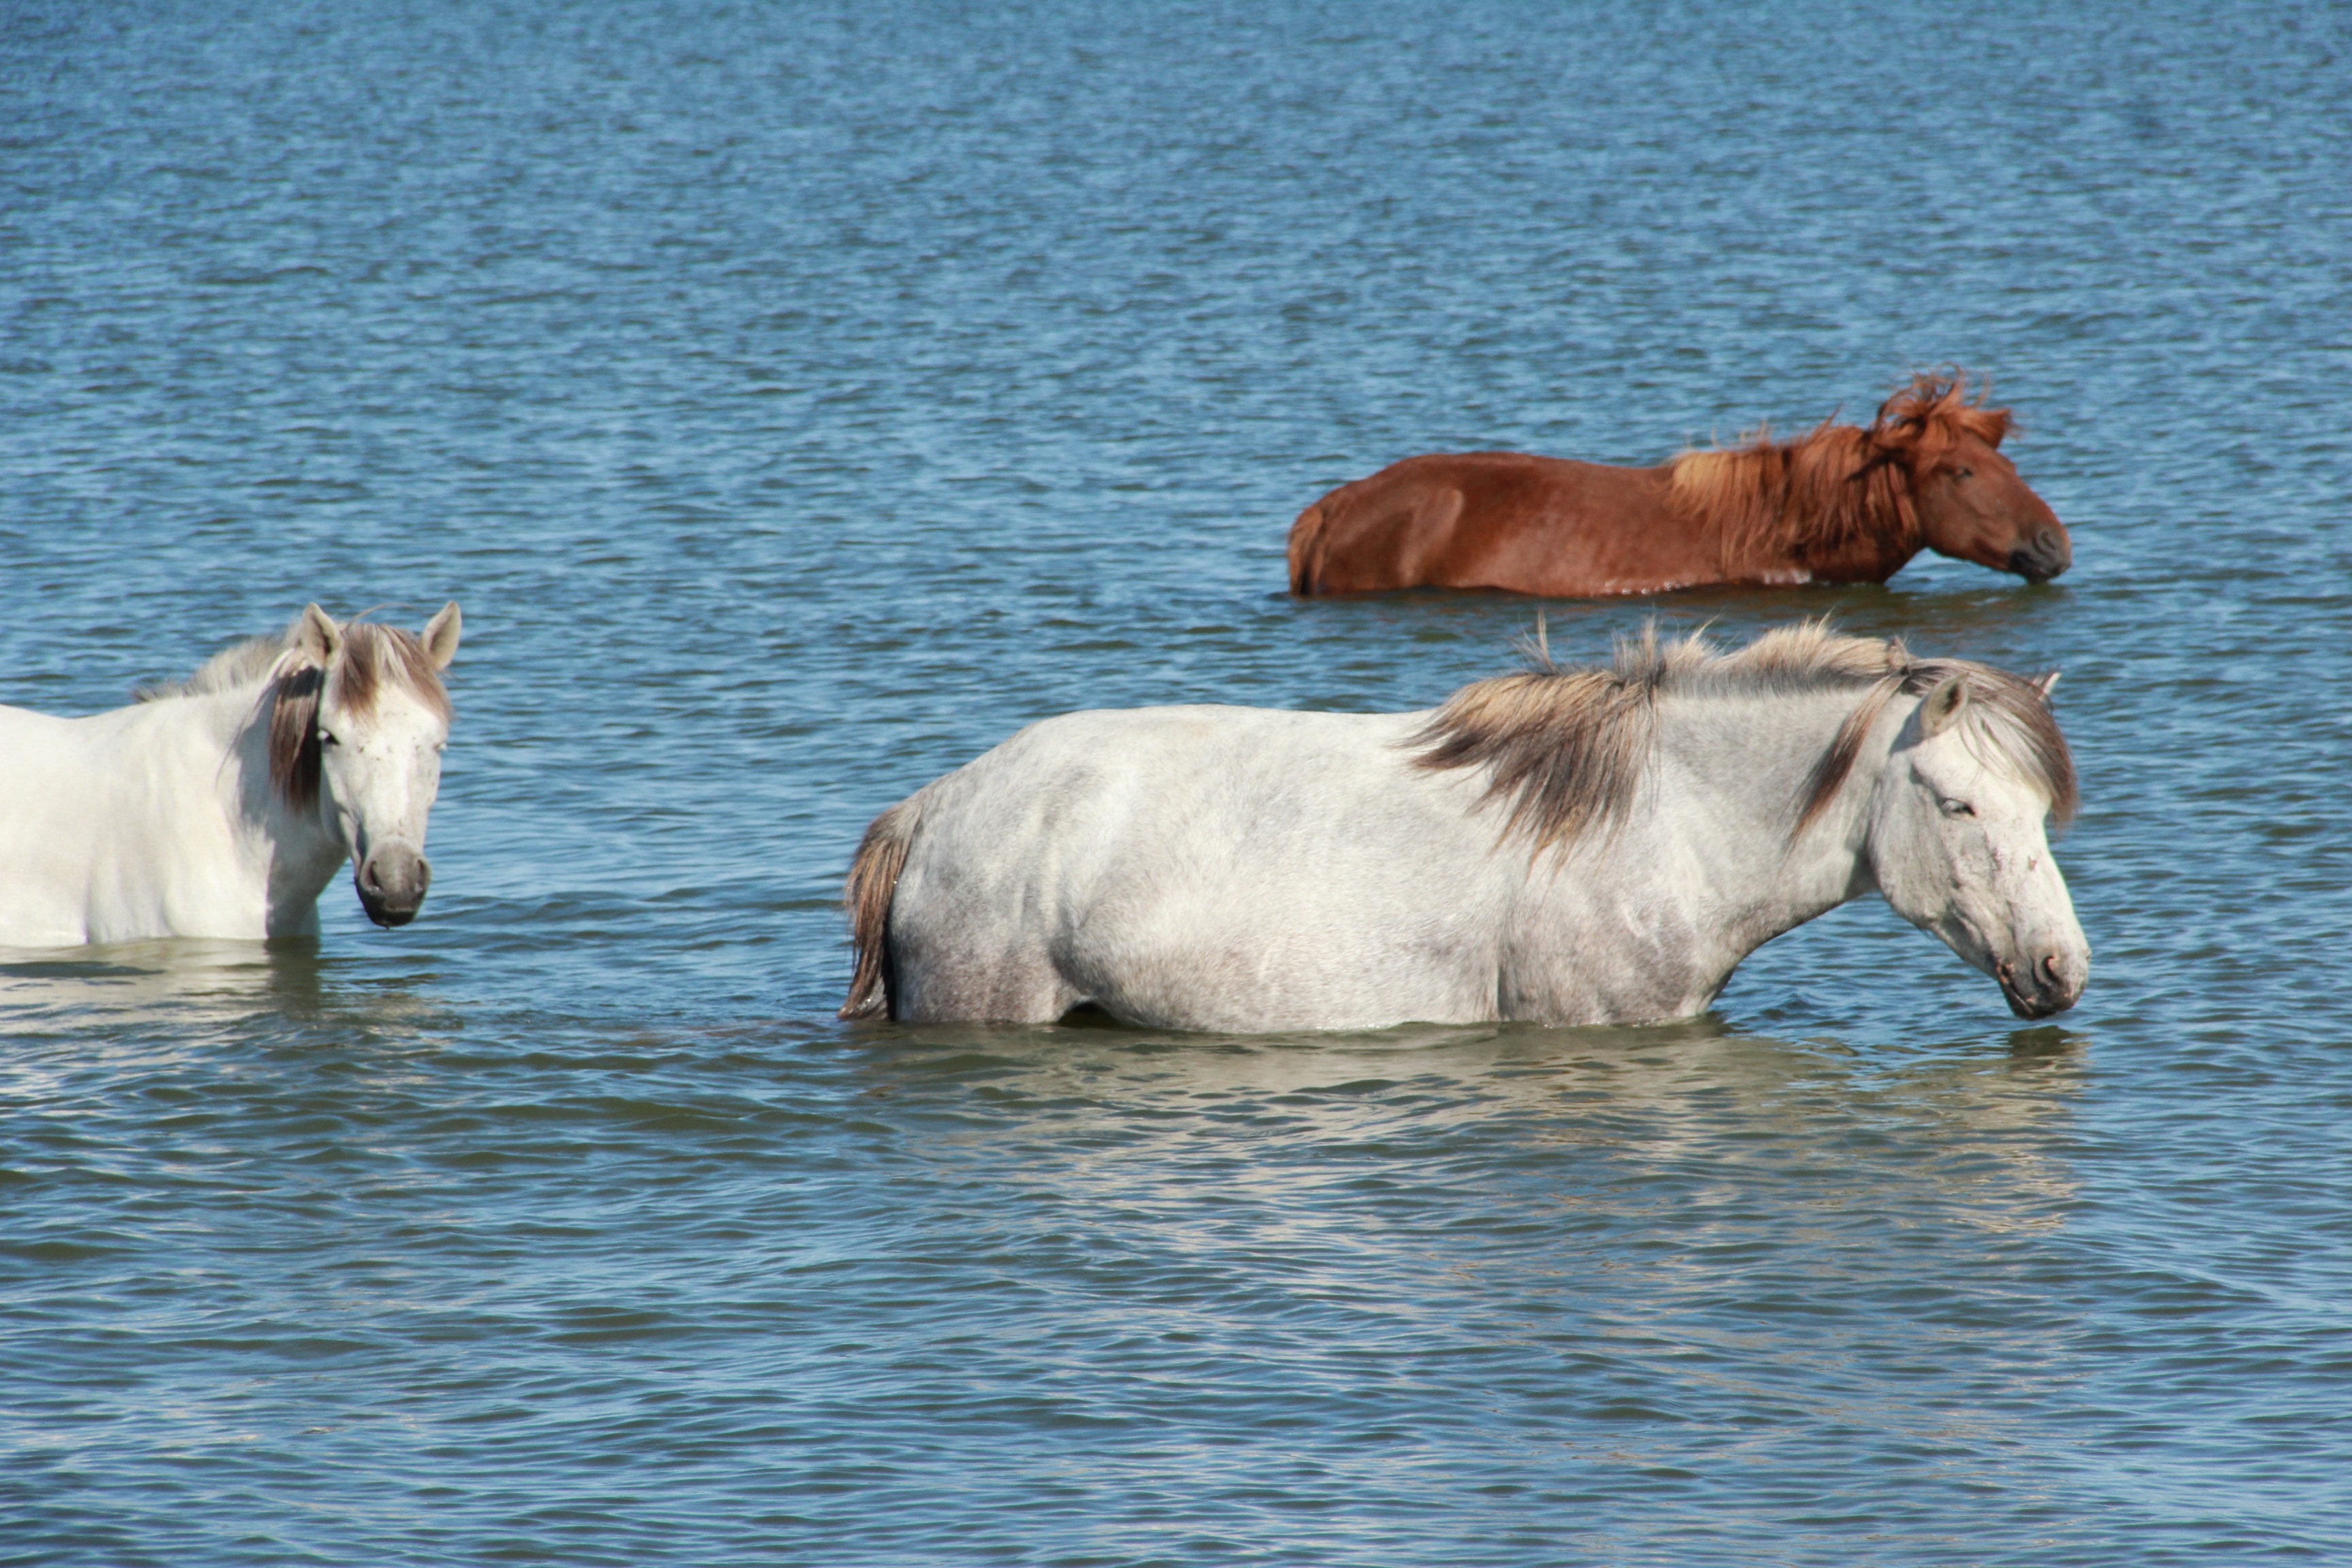 two white and one brown horses on body of water during day time